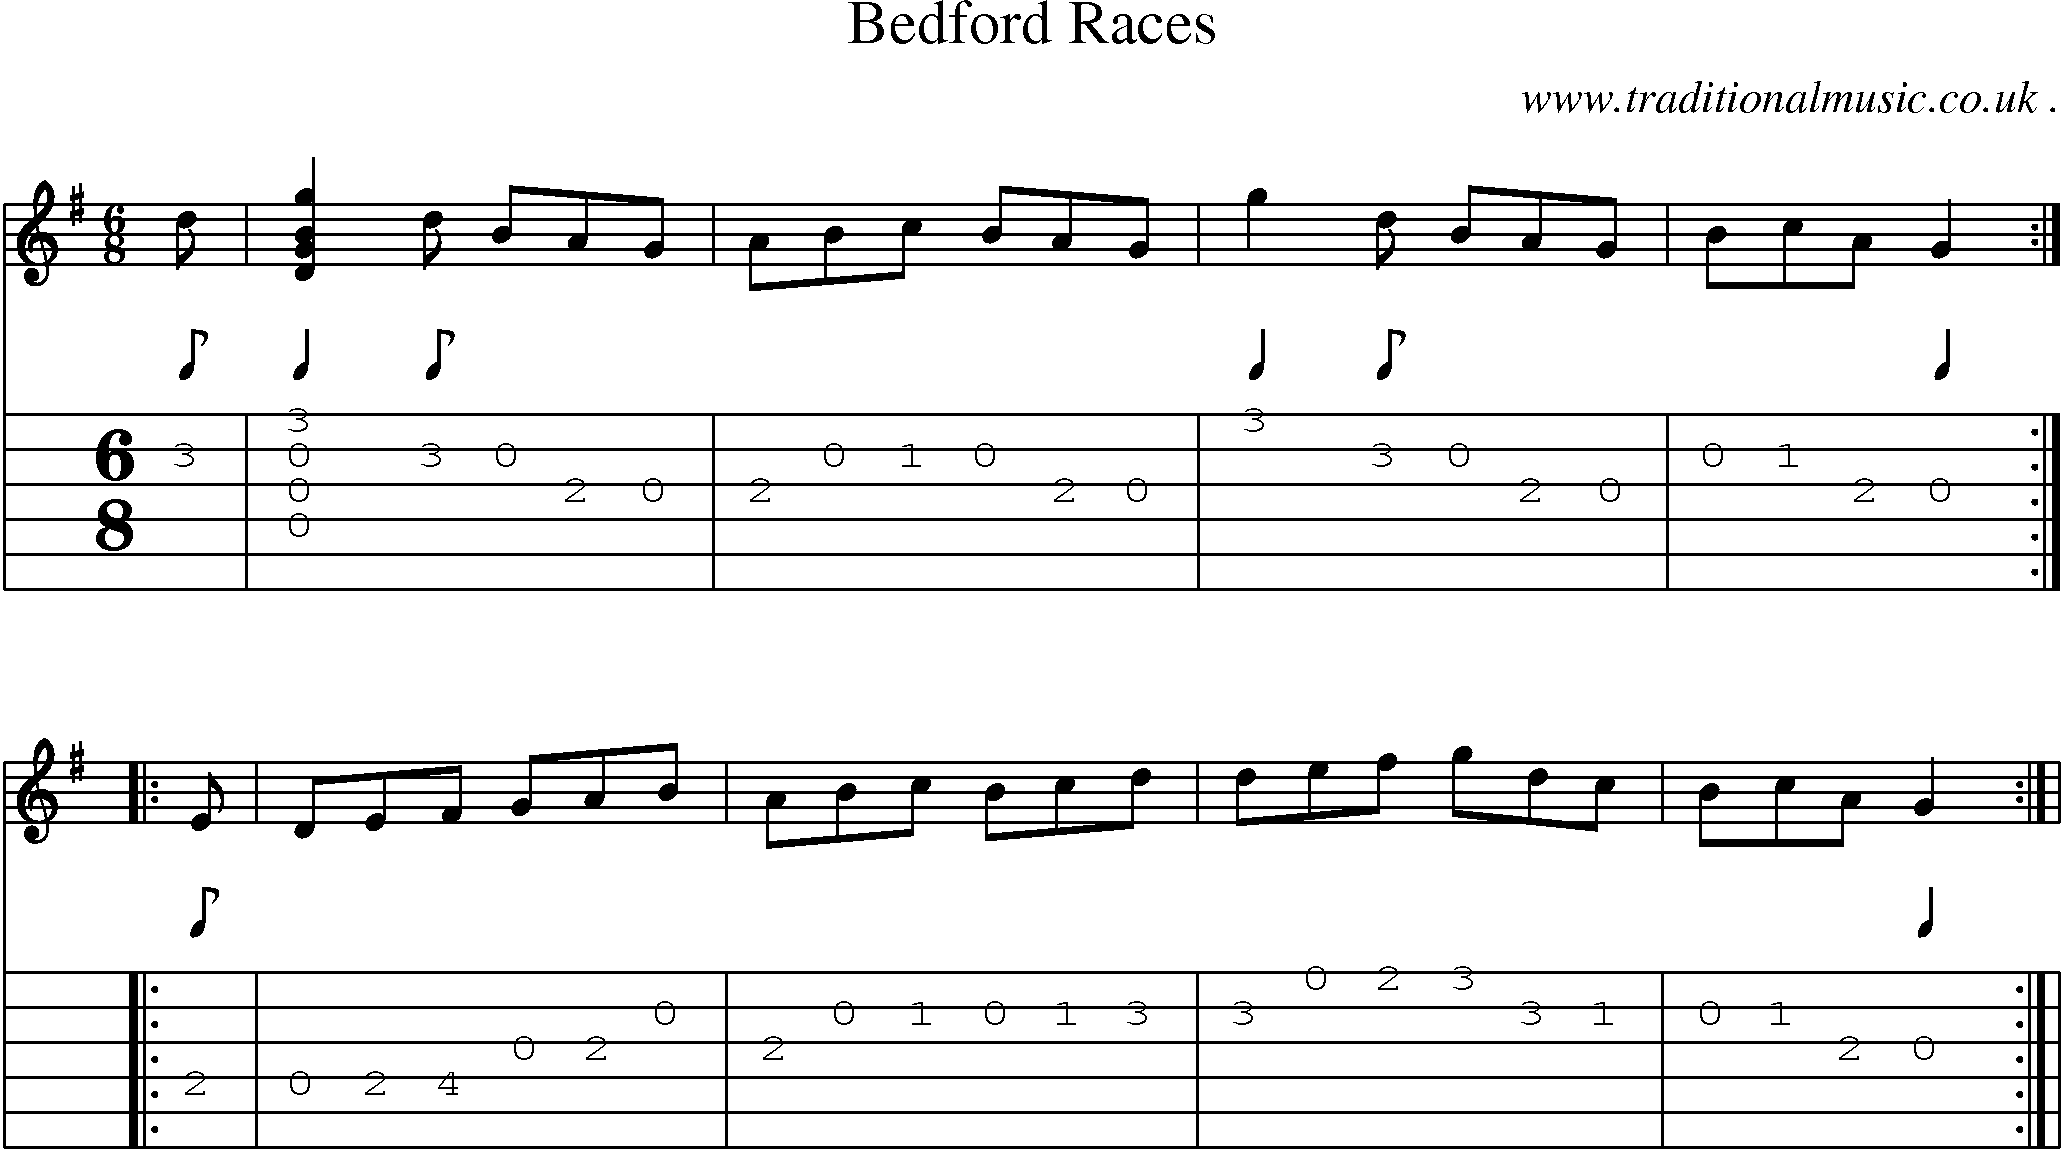 Sheet-Music and Guitar Tabs for Bedford Races